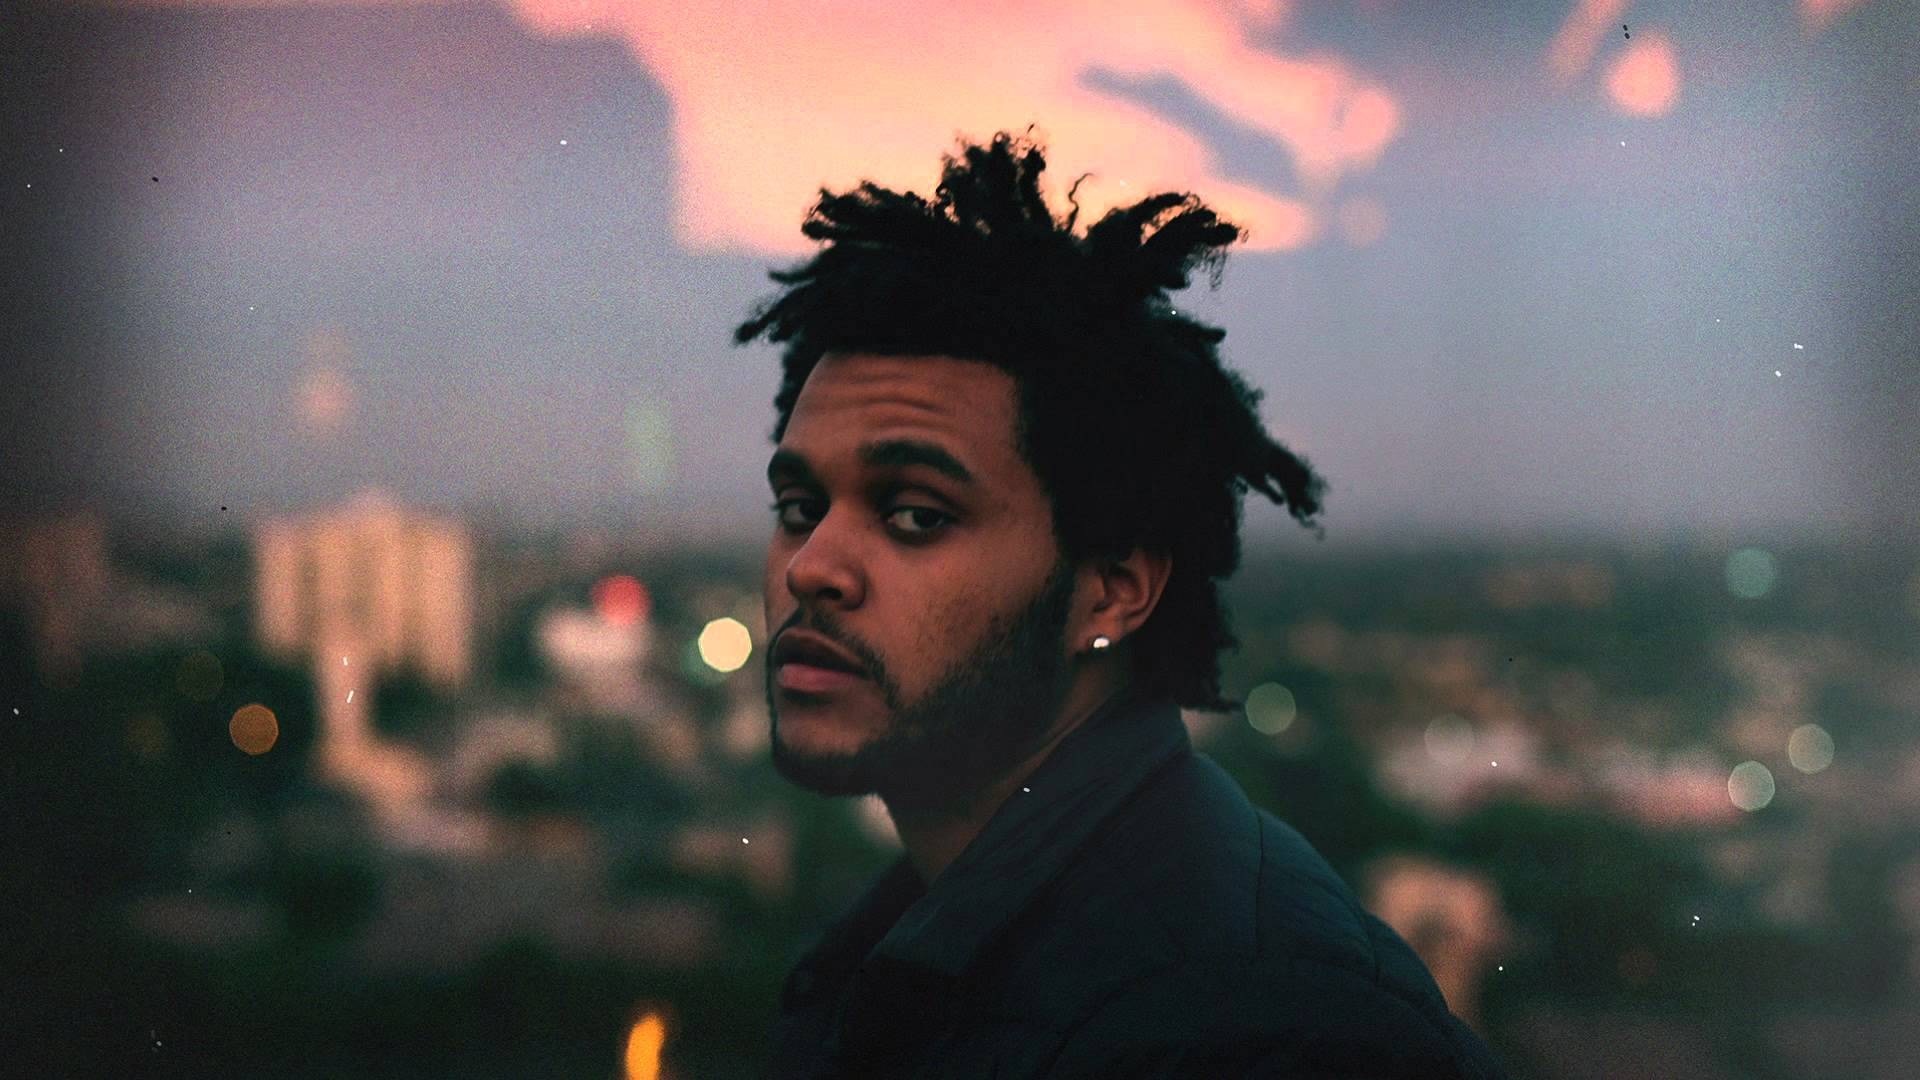 1920x1080 The Weeknd 4K Wallpapers Top Free The Weeknd 4K Backgrounds